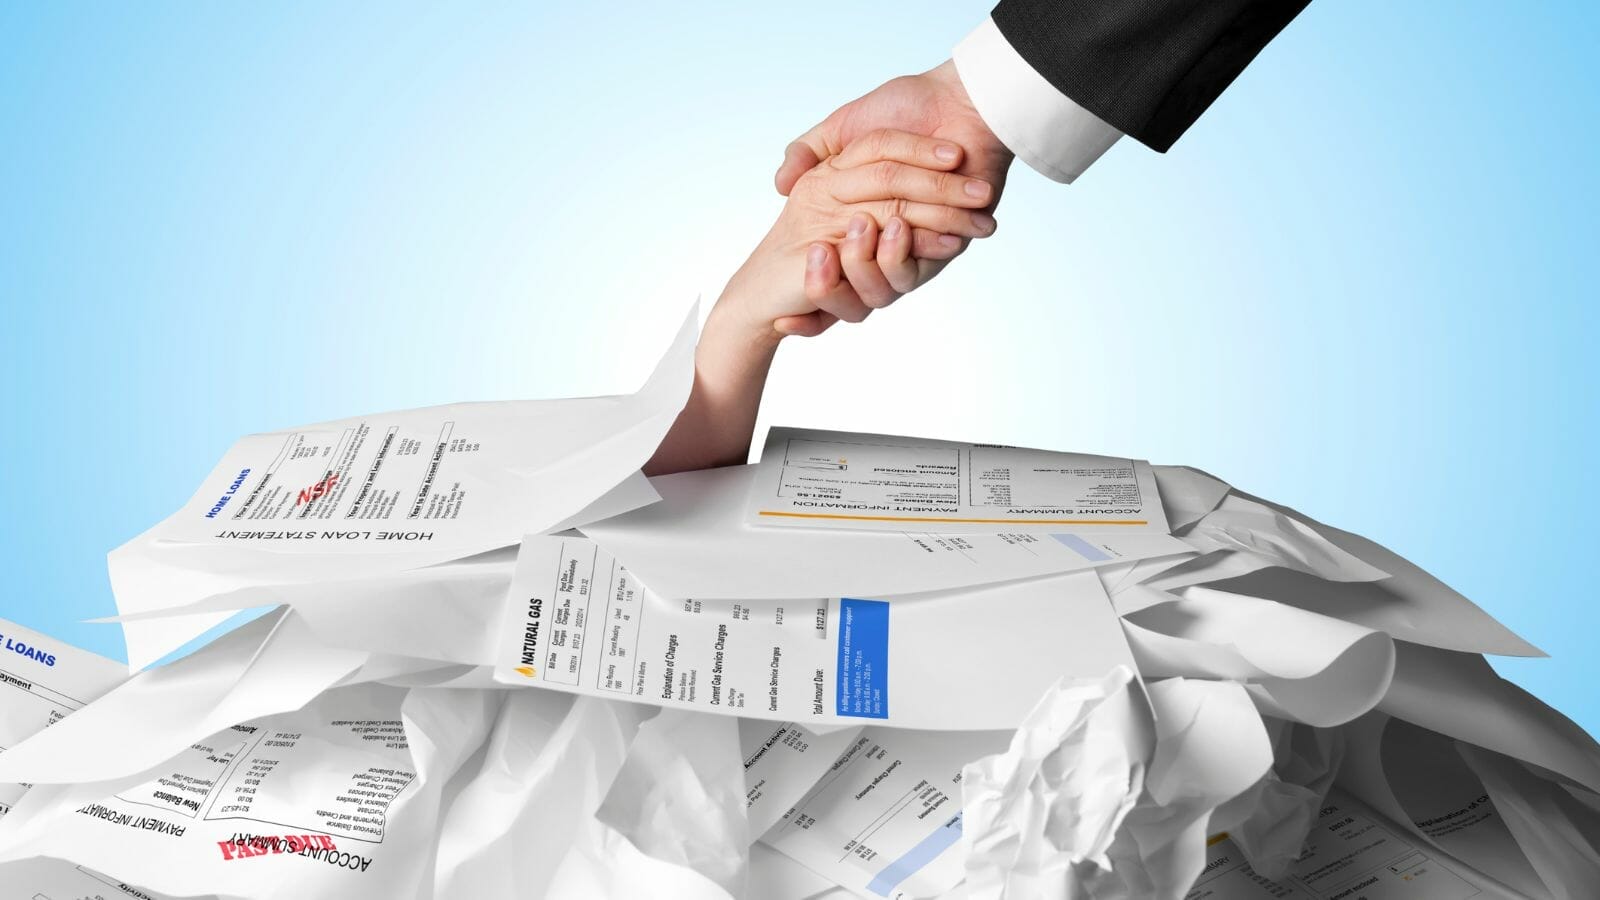 person pulling another person out of a pile of papers

